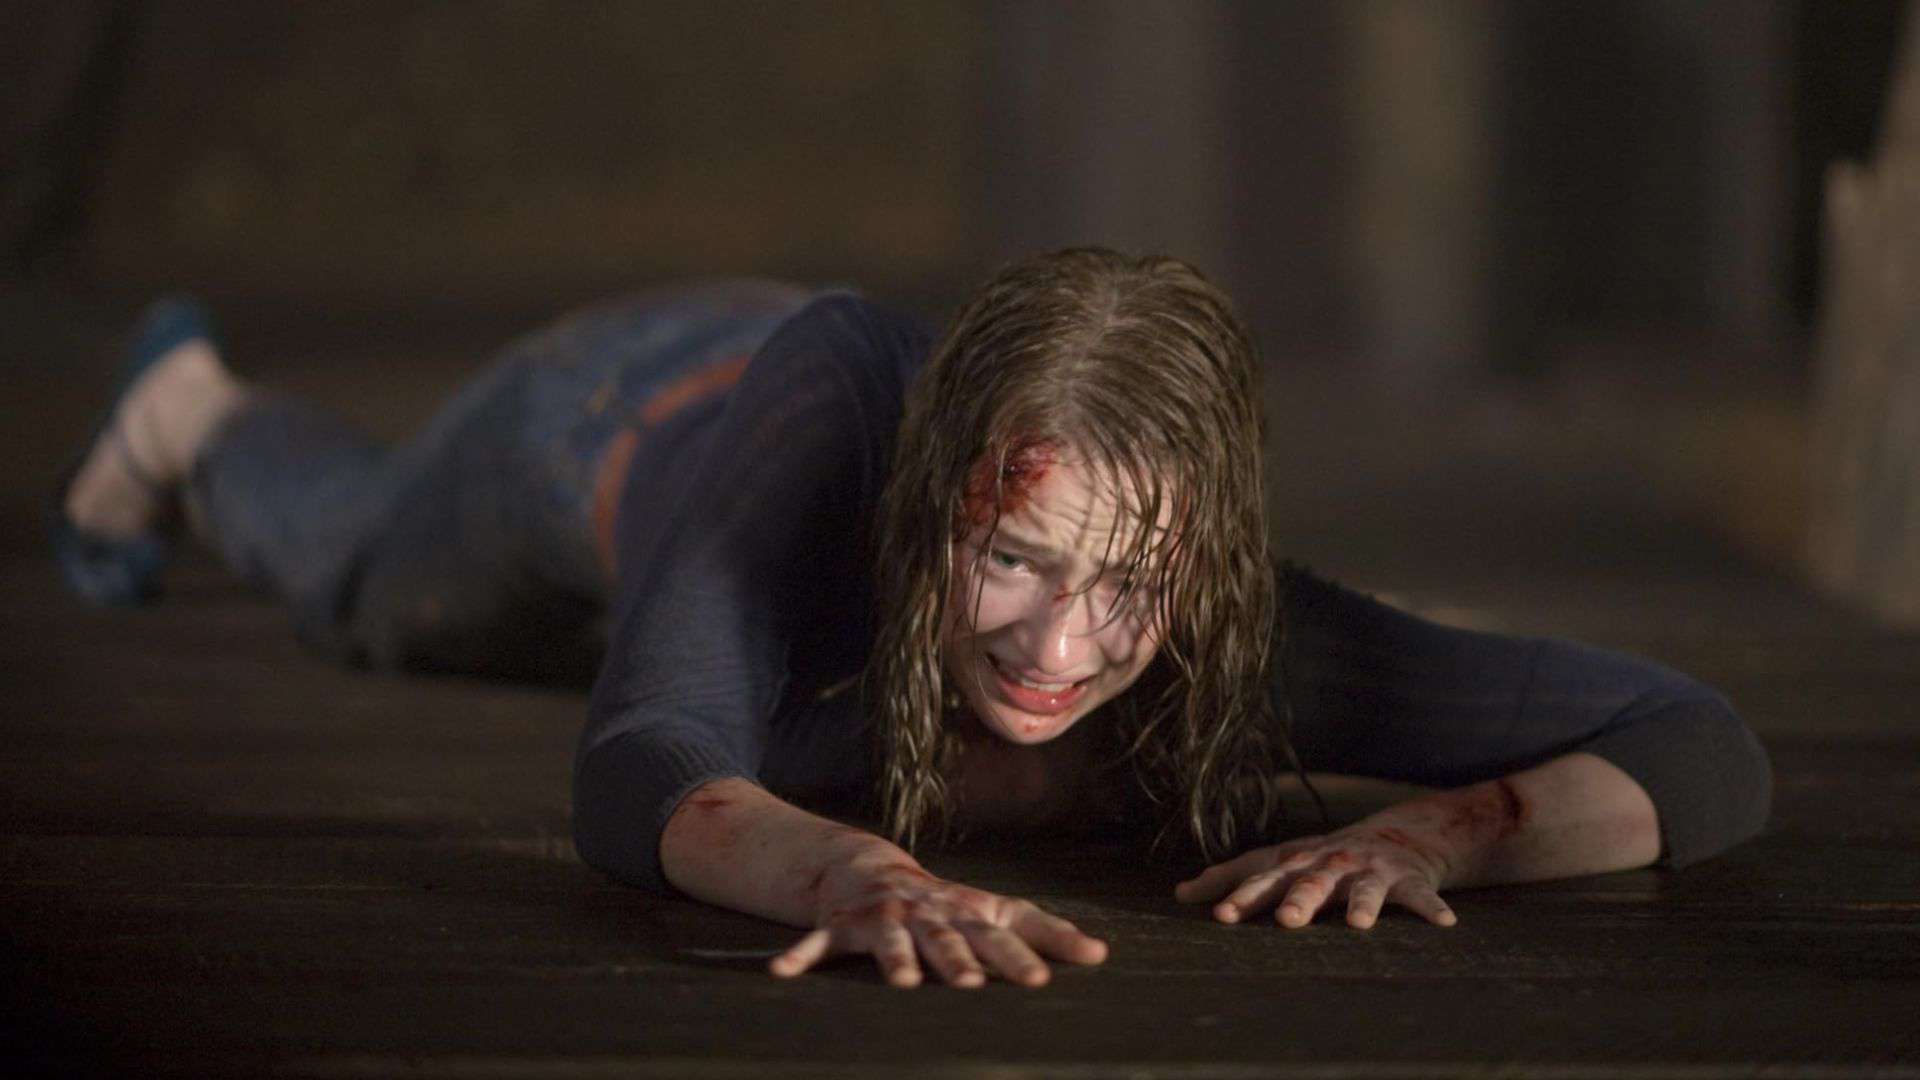  A woman with a head injury crawls on the floor in this image from Mutant Enemy Productions.